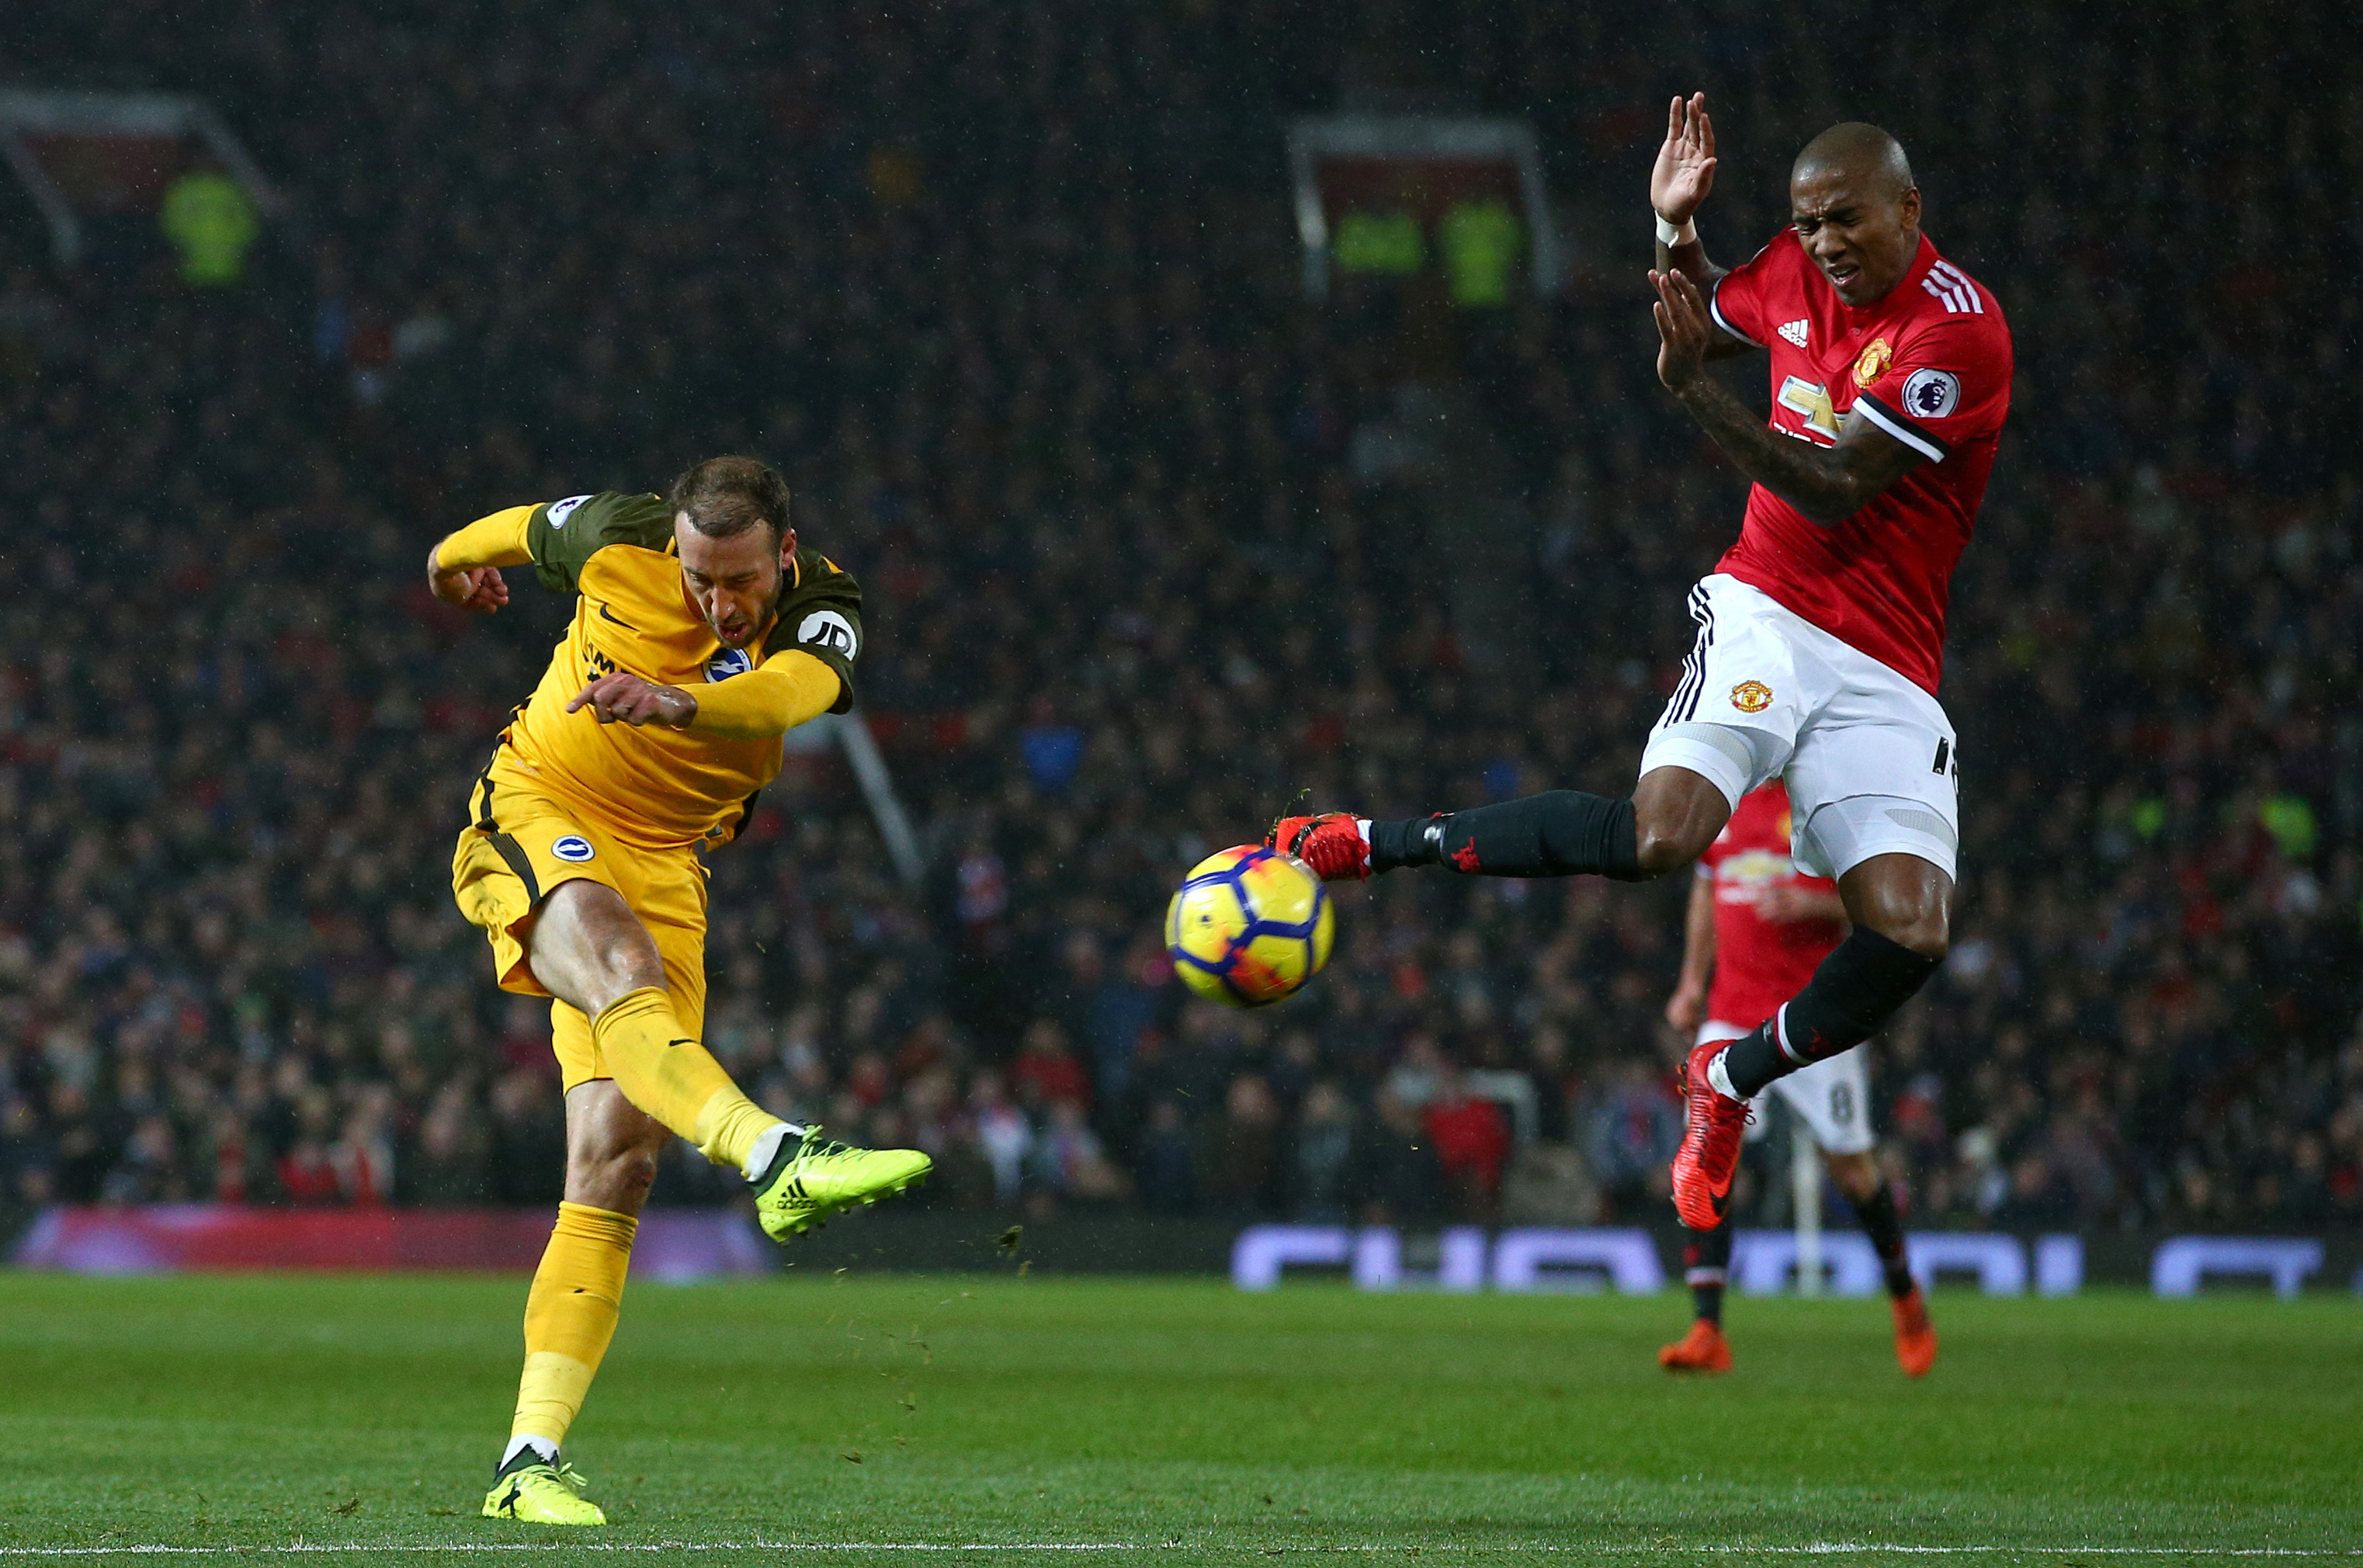 Ashley Young goes to block the ball in a game against Brighton